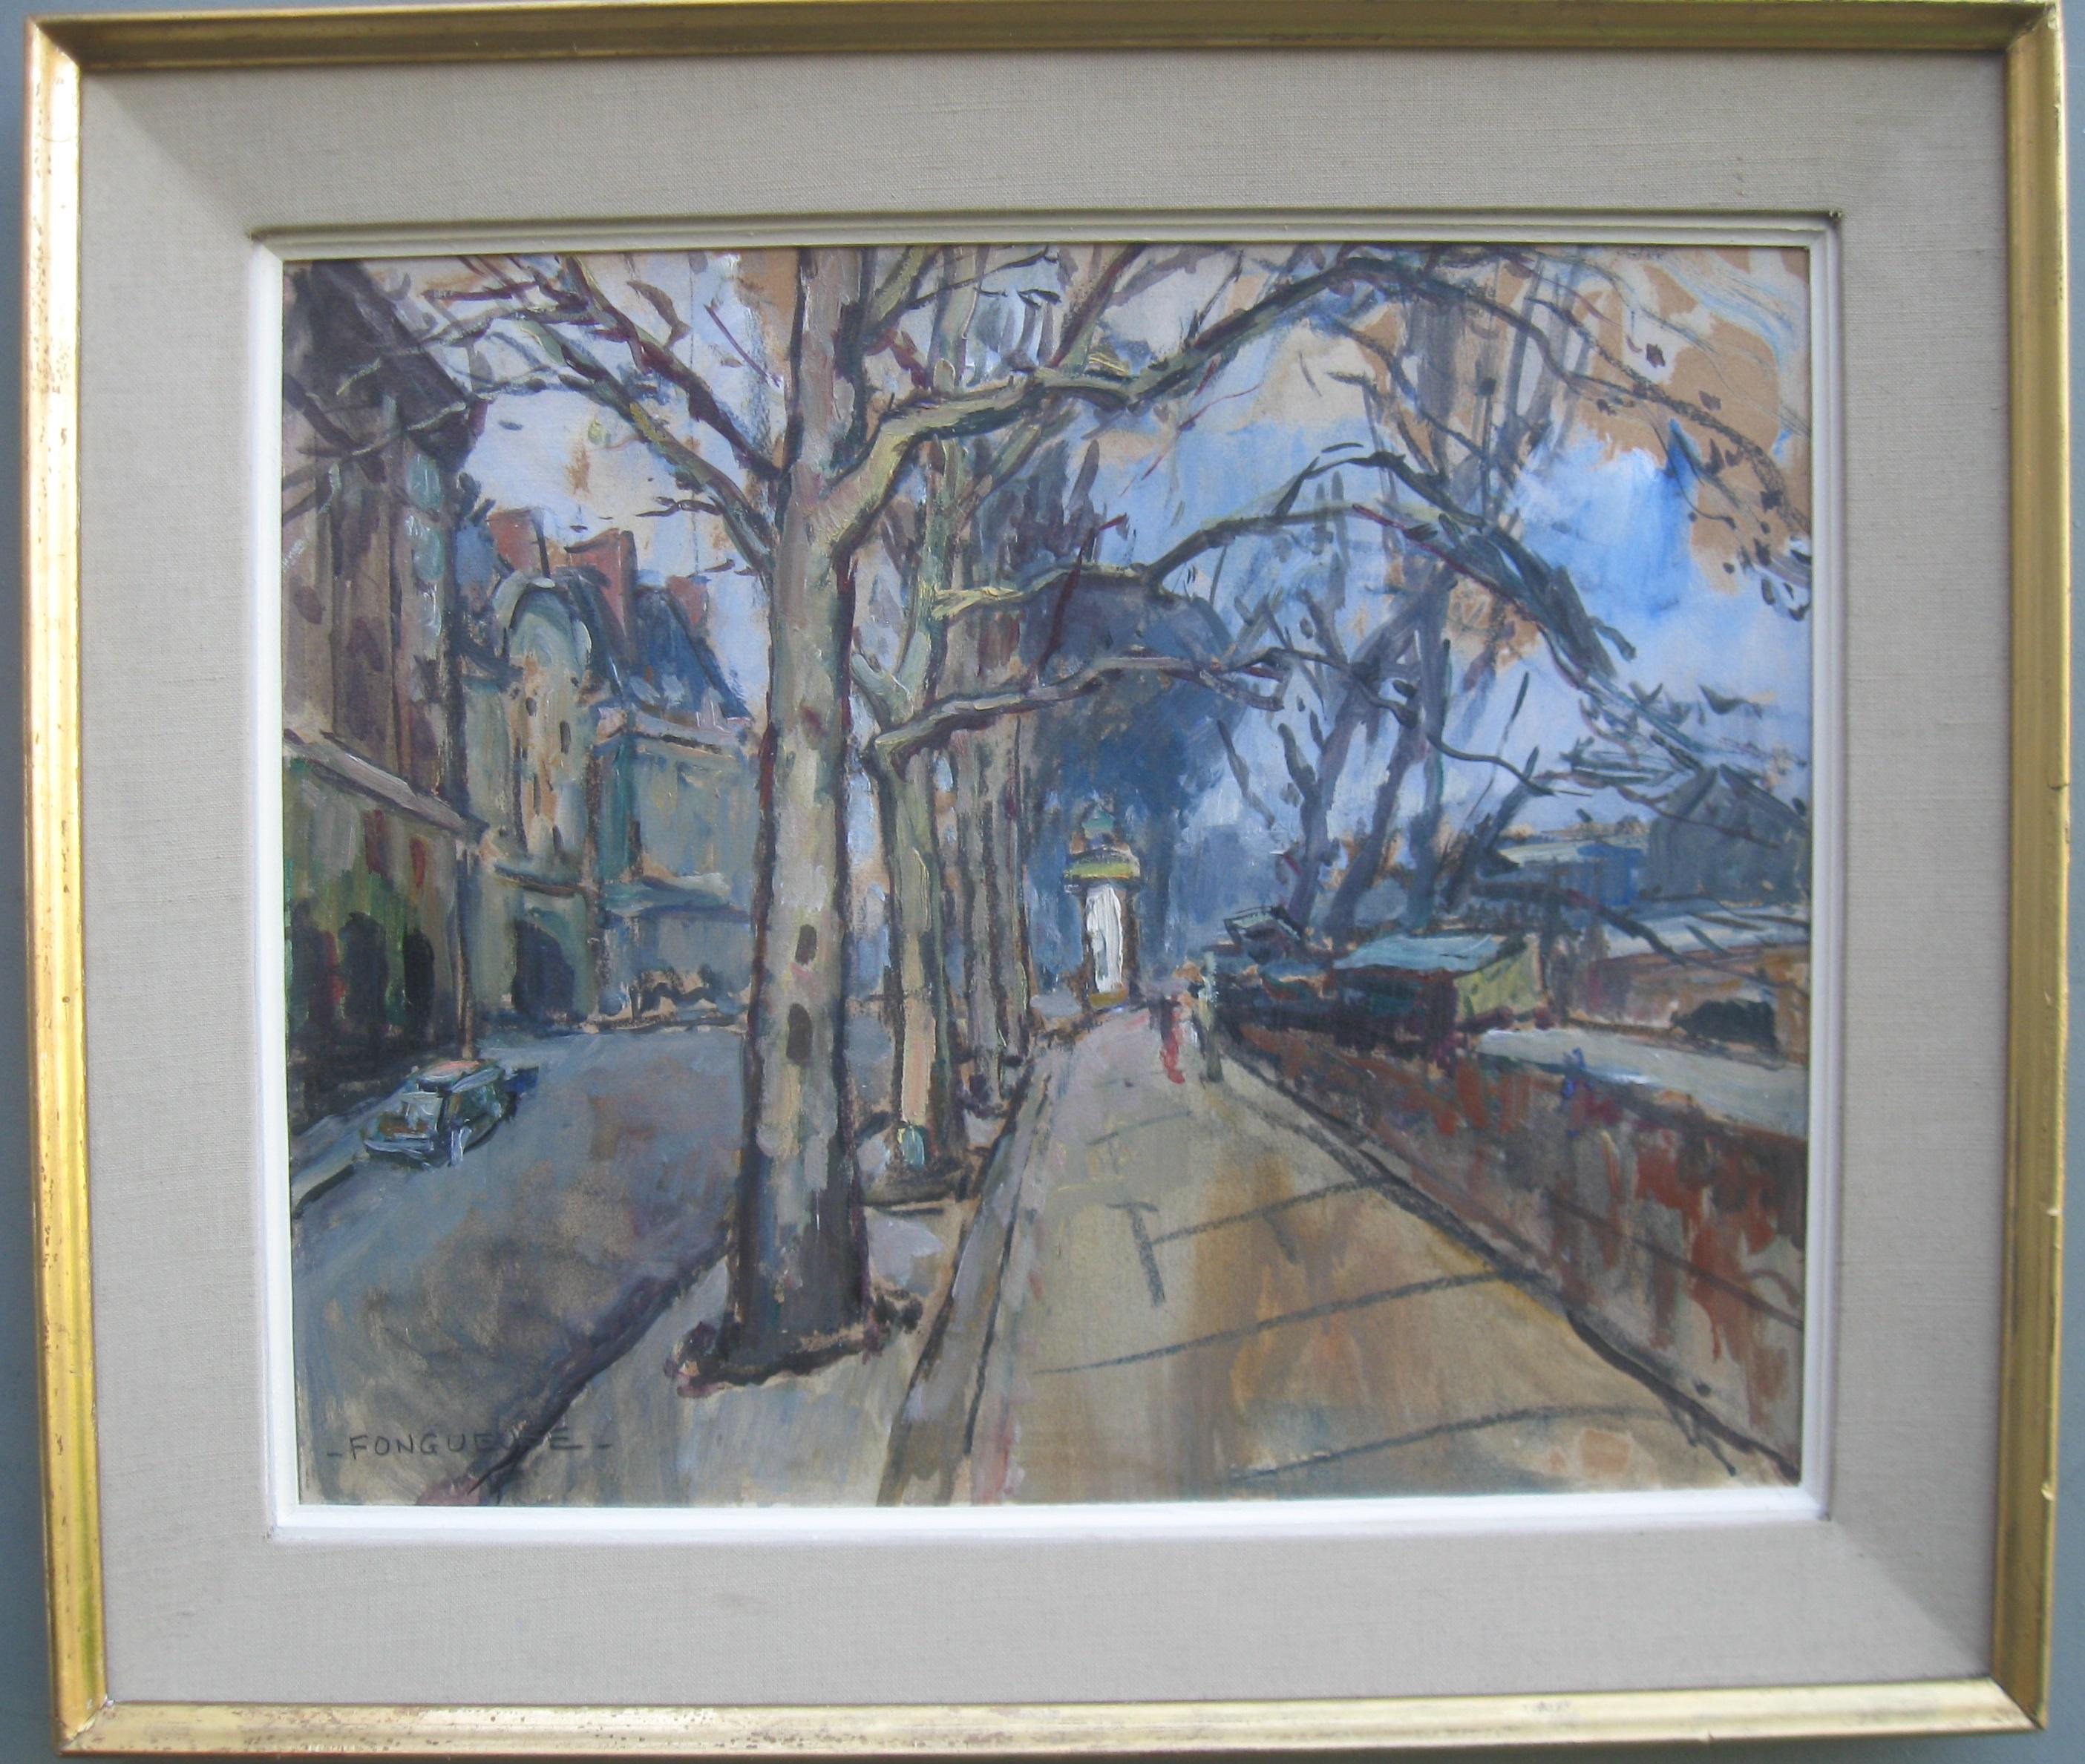 Maurice Fongueuse Landscape Painting - French Impressionist: Paris Street Scene near The river Seine oil circa 1950's